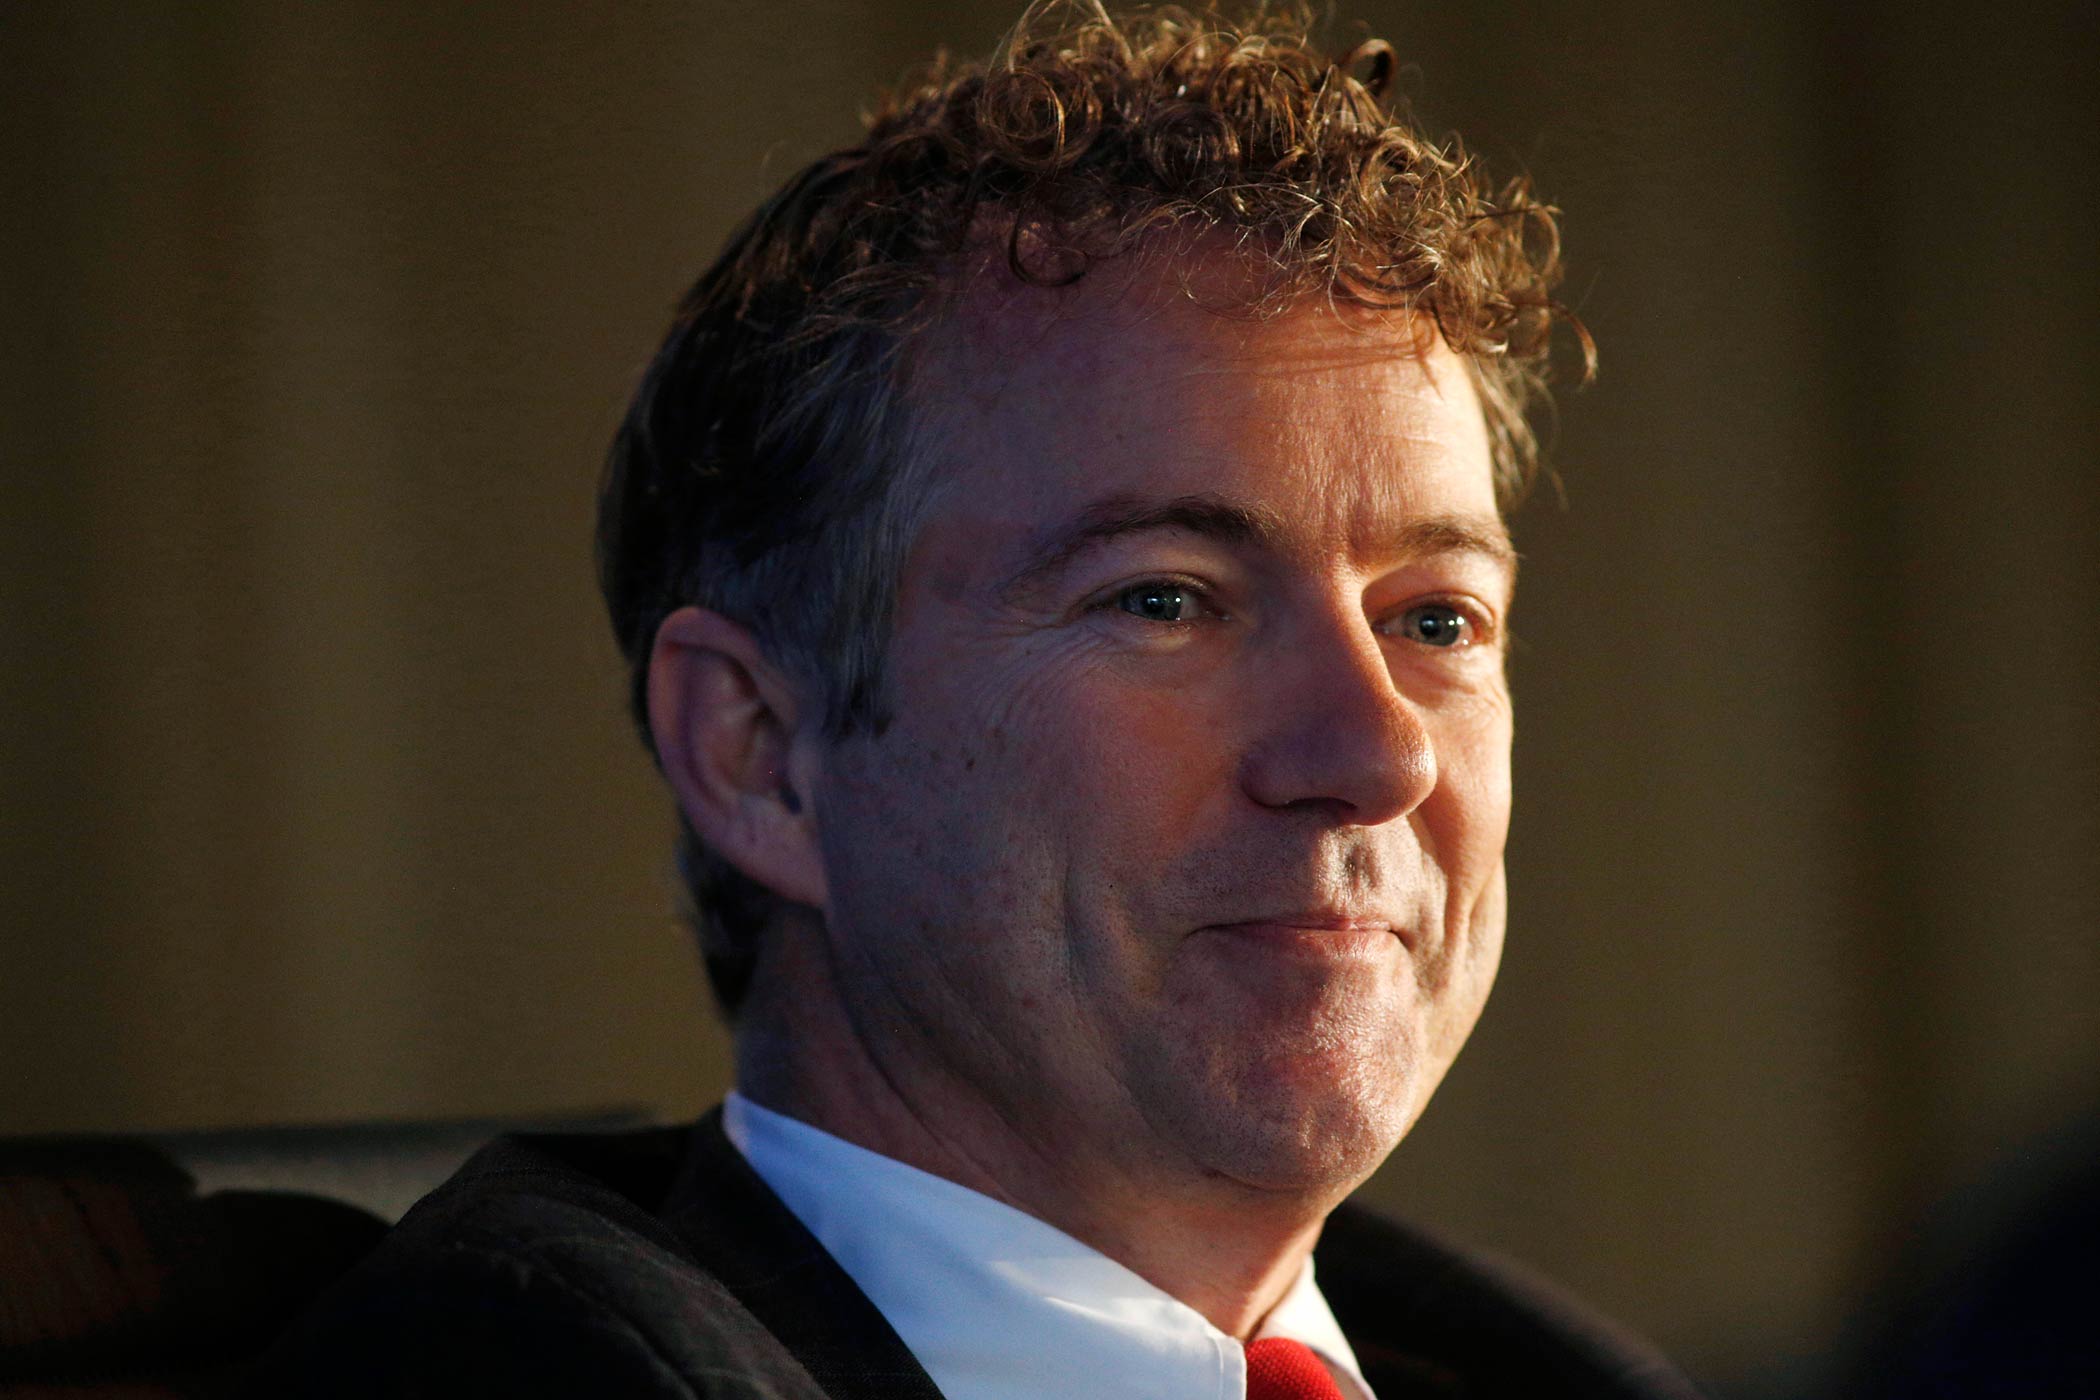 Rand Paul speaks at the Wall Street Journal's CEO Council meeting in Washington